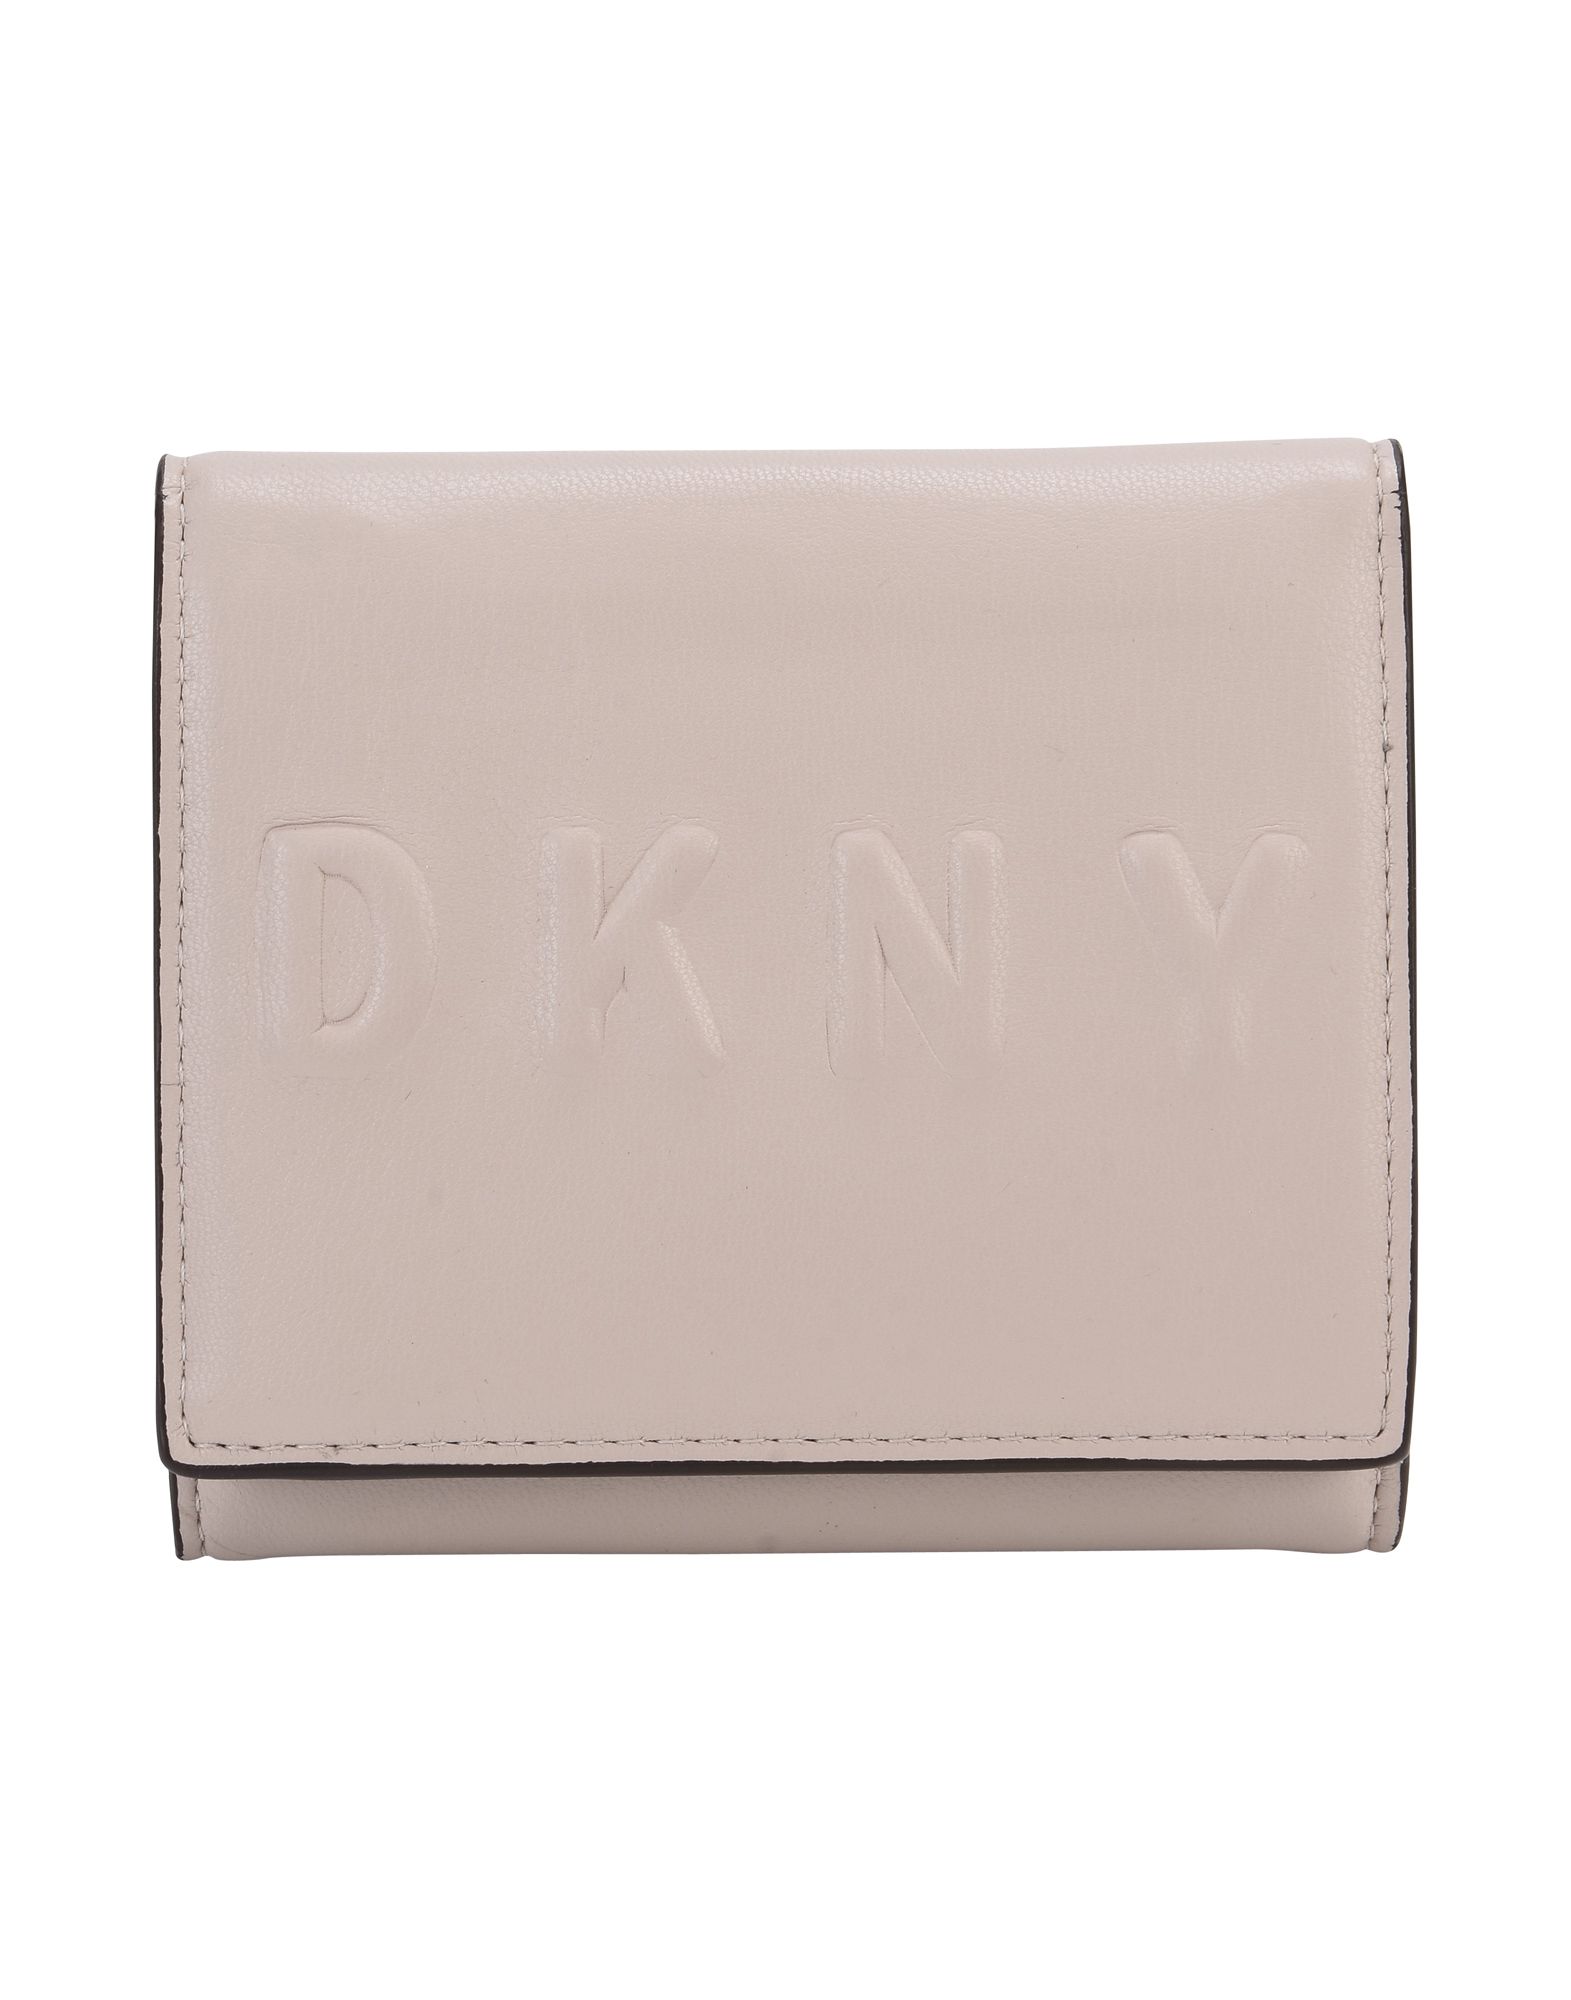 DKNY レディース 財布 ローズピンク ポリウレタン 100% TILLY TRIFOLD WALLET